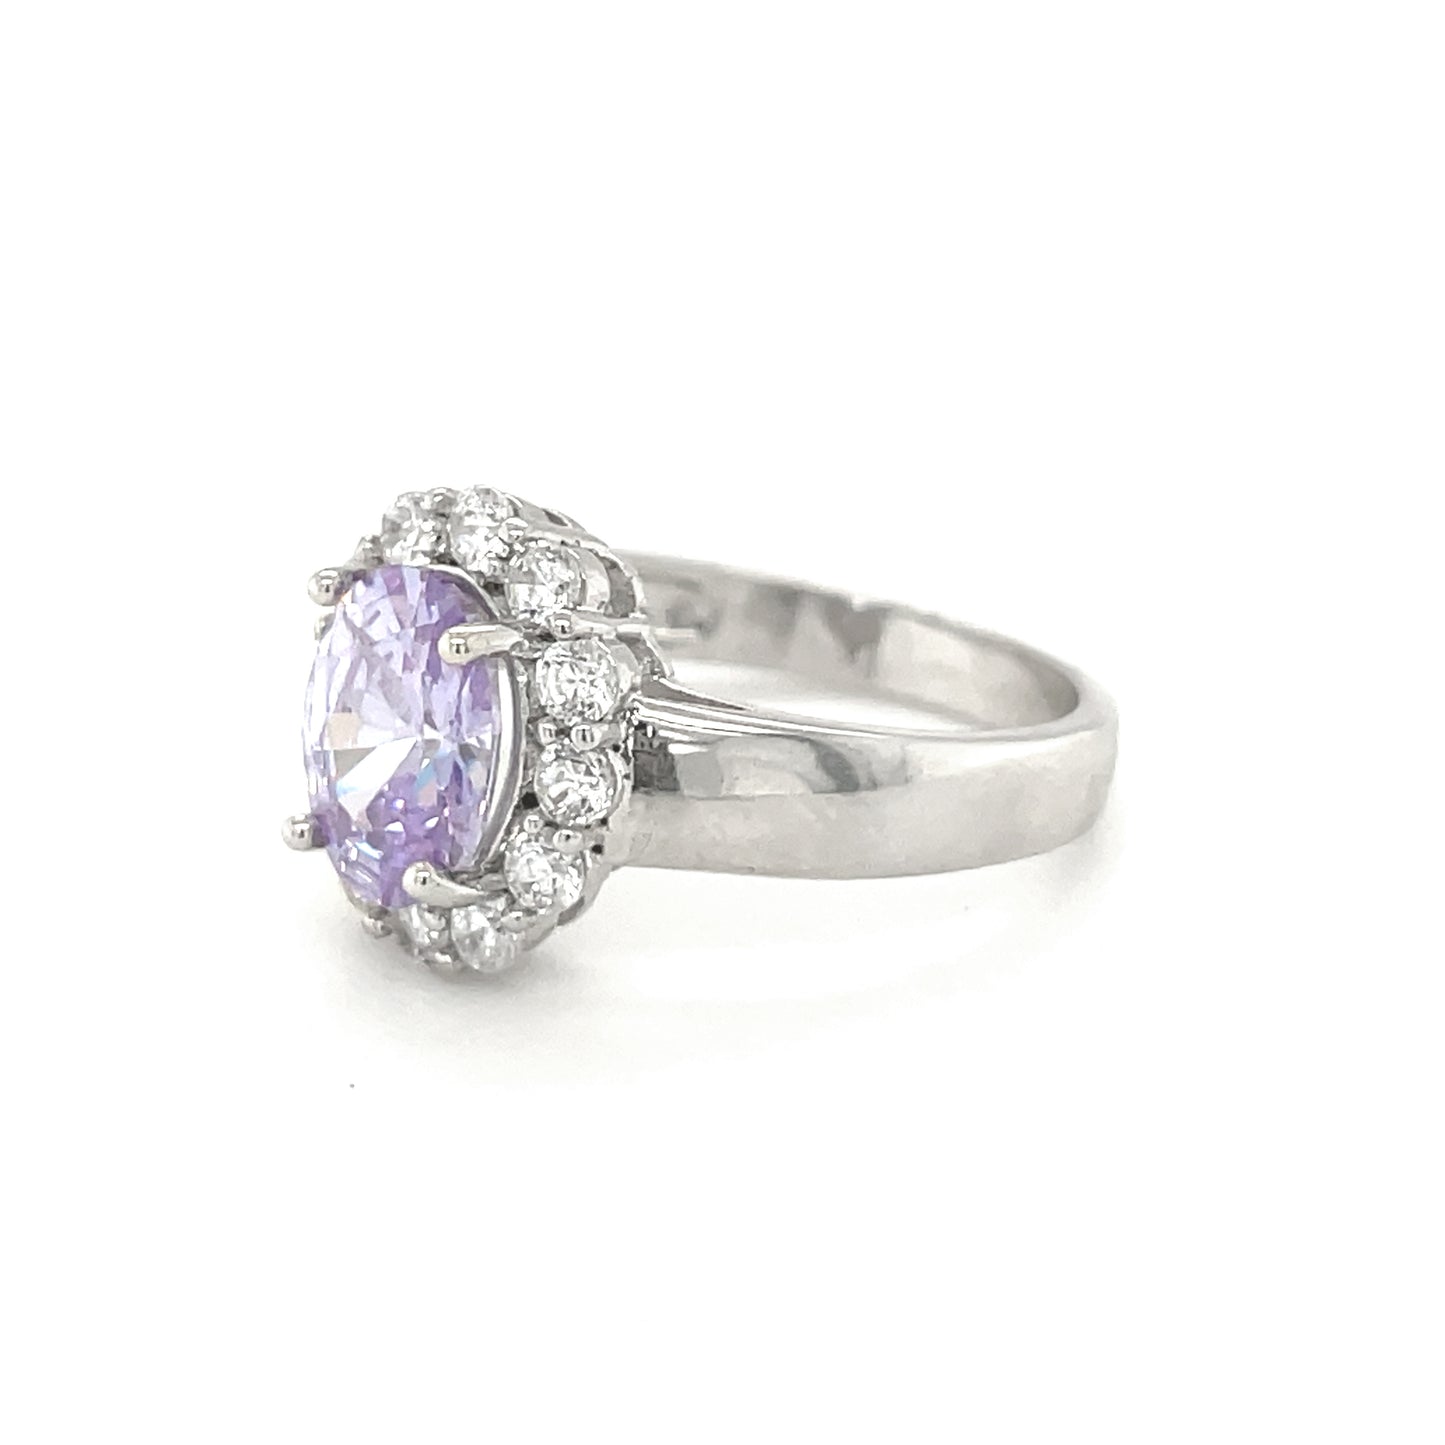 BMR80117CB - Oval Cut Halo - Engagemet Ring